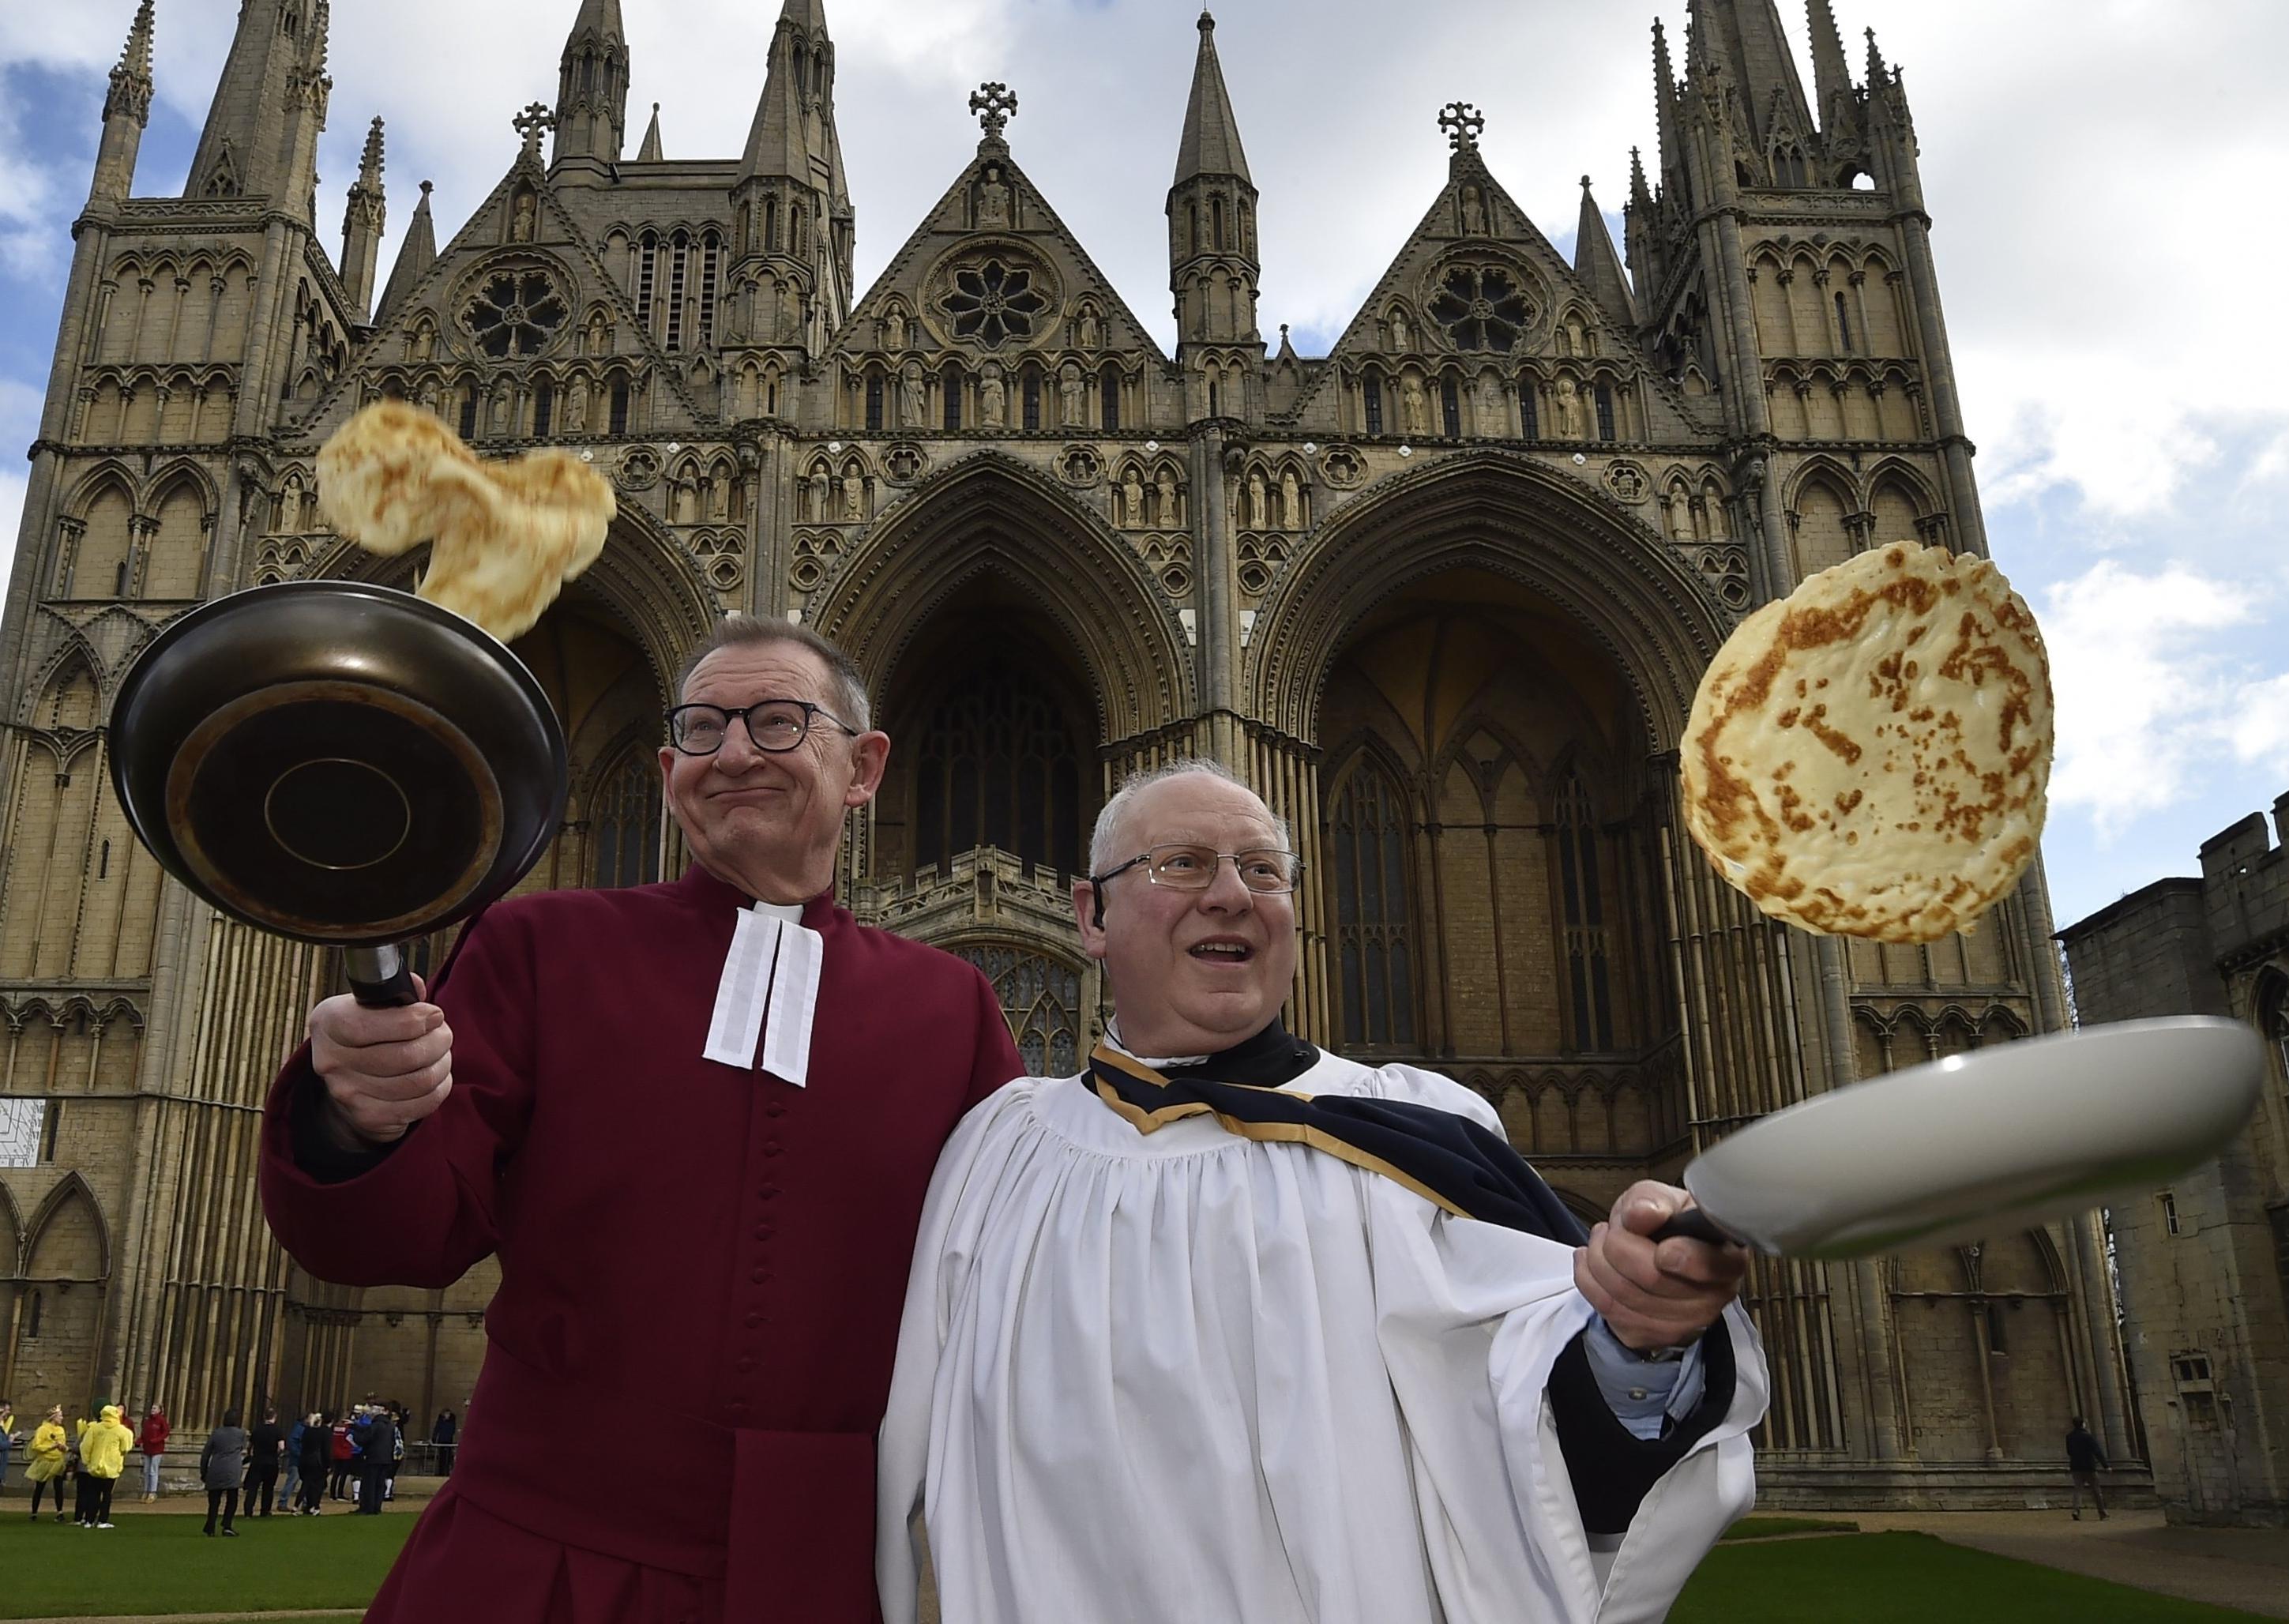 The Very Revd Christopher Dalliston, Dean of Peterborough, with head verger David Wood